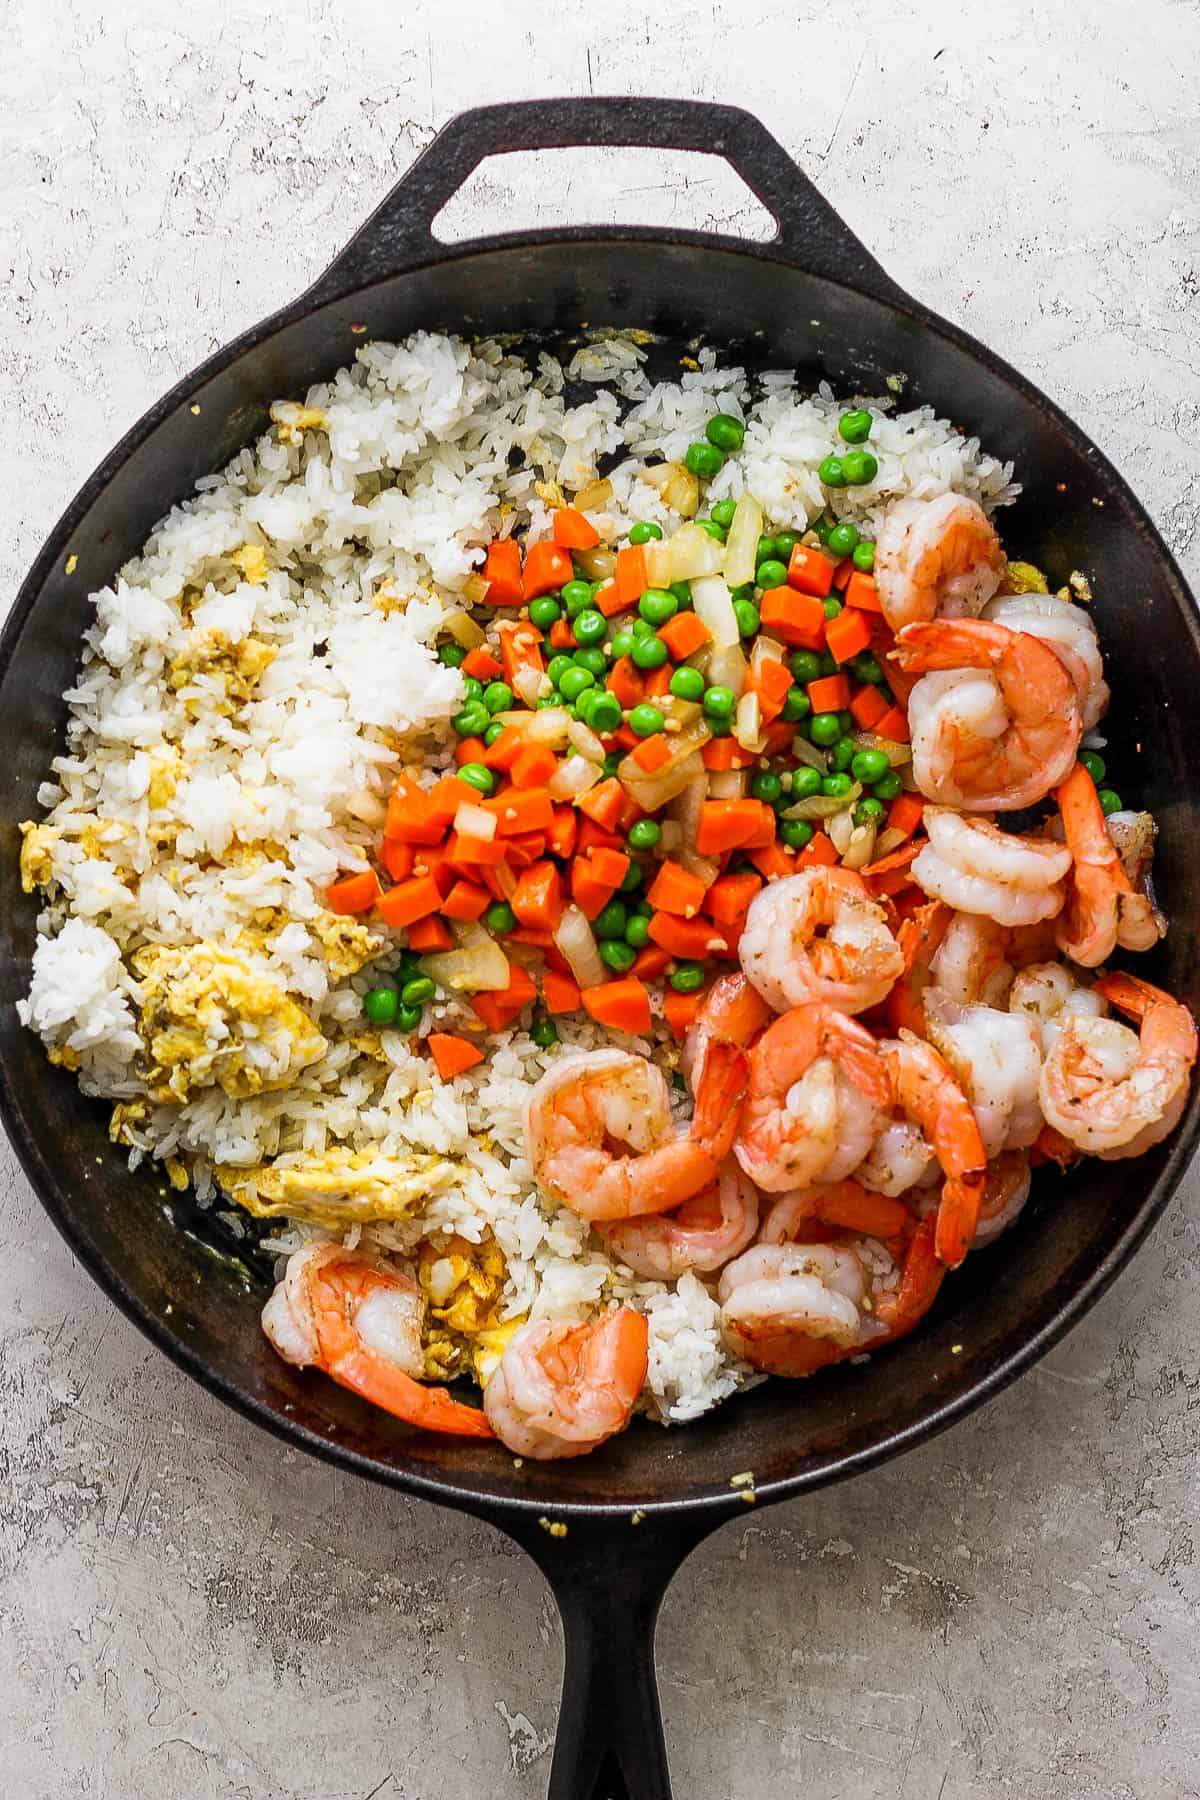 The rice, egg, veggies and shrimp separated out in the skillet.